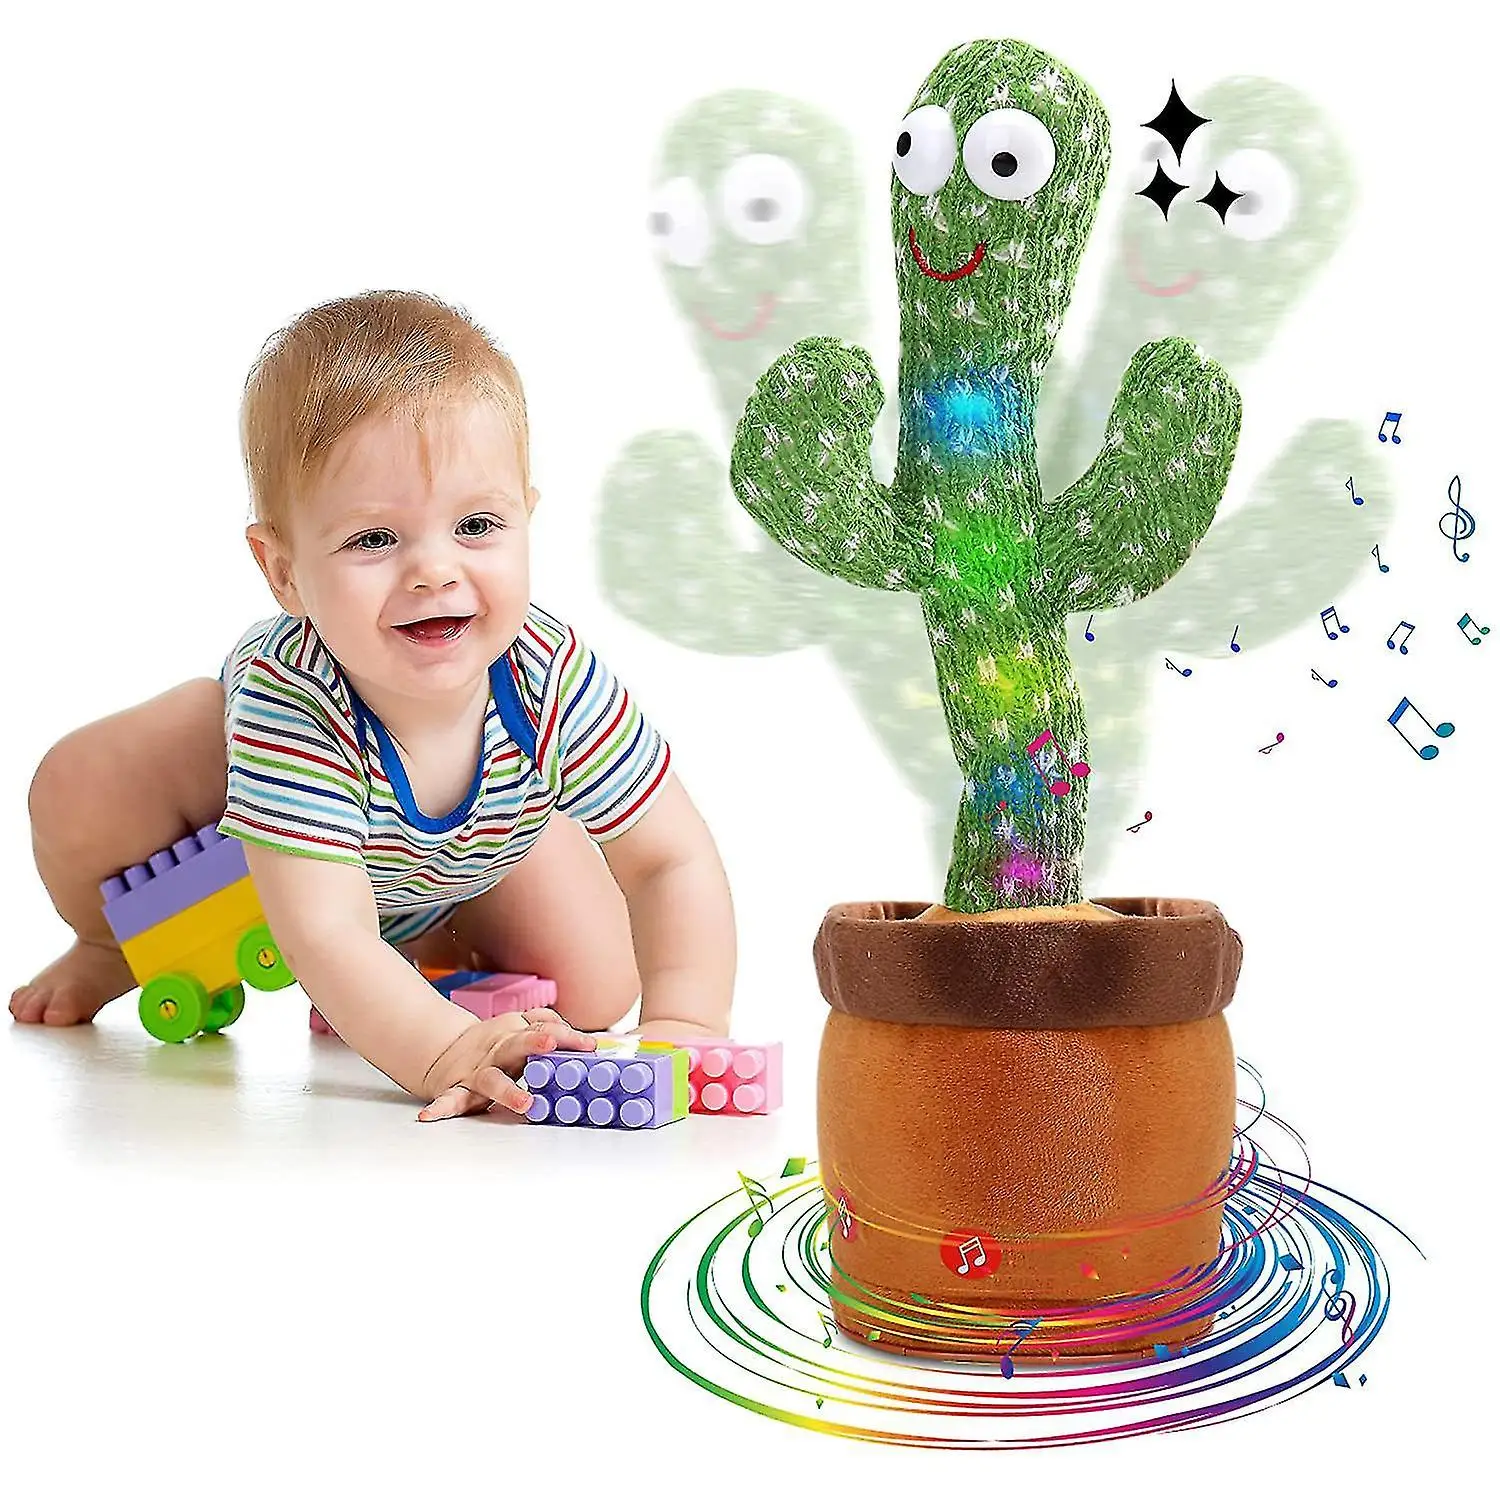 

Dancing Cactus Toy,Talking Repeat Singing Sunny Cactus Toy(120 Songs)